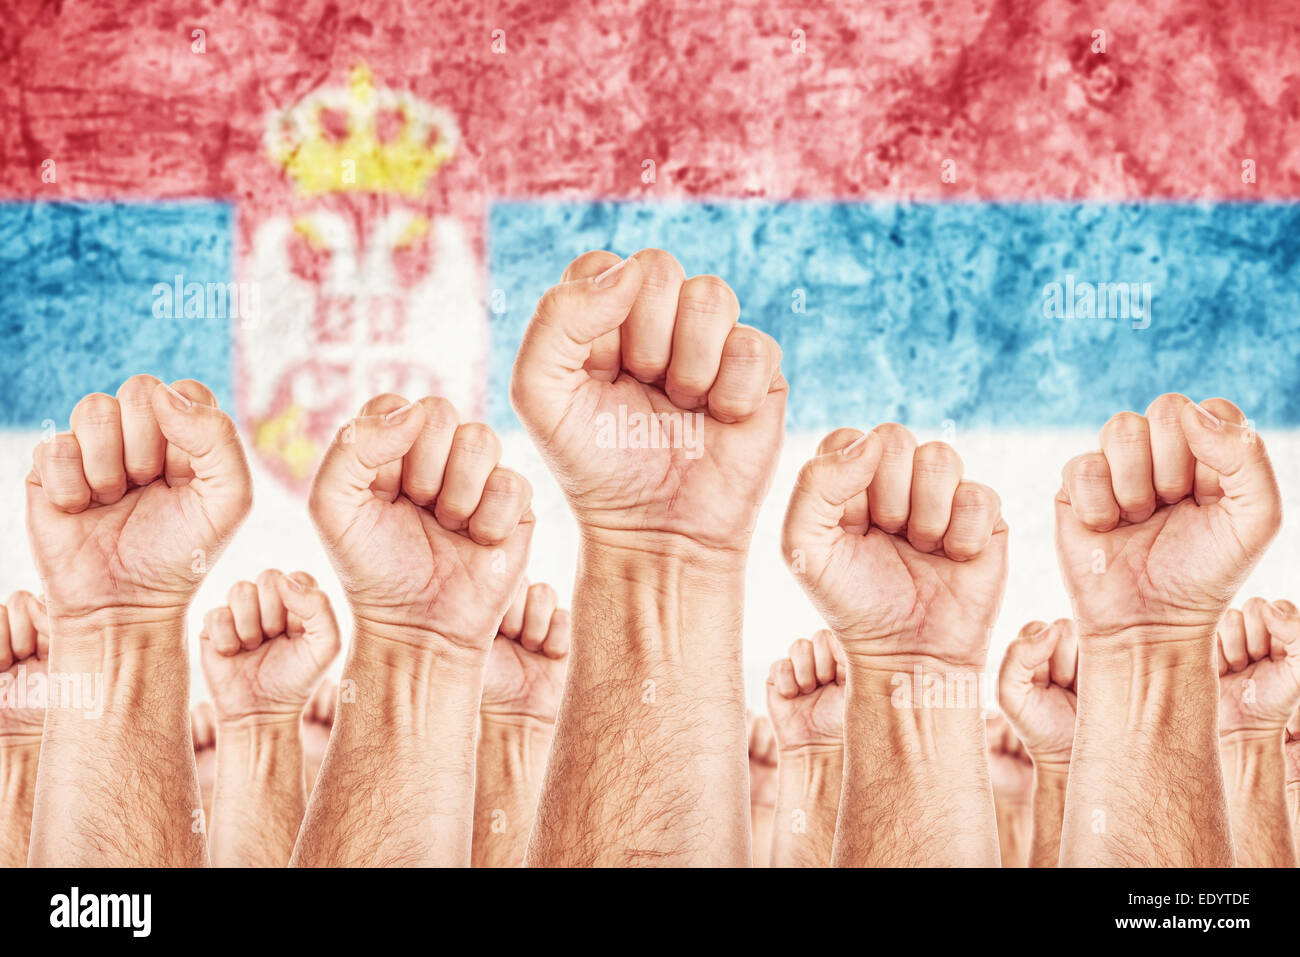 Serbia Labor movement, workers union strike concept with male fists raised in the air fighting for their rights Stock Photo